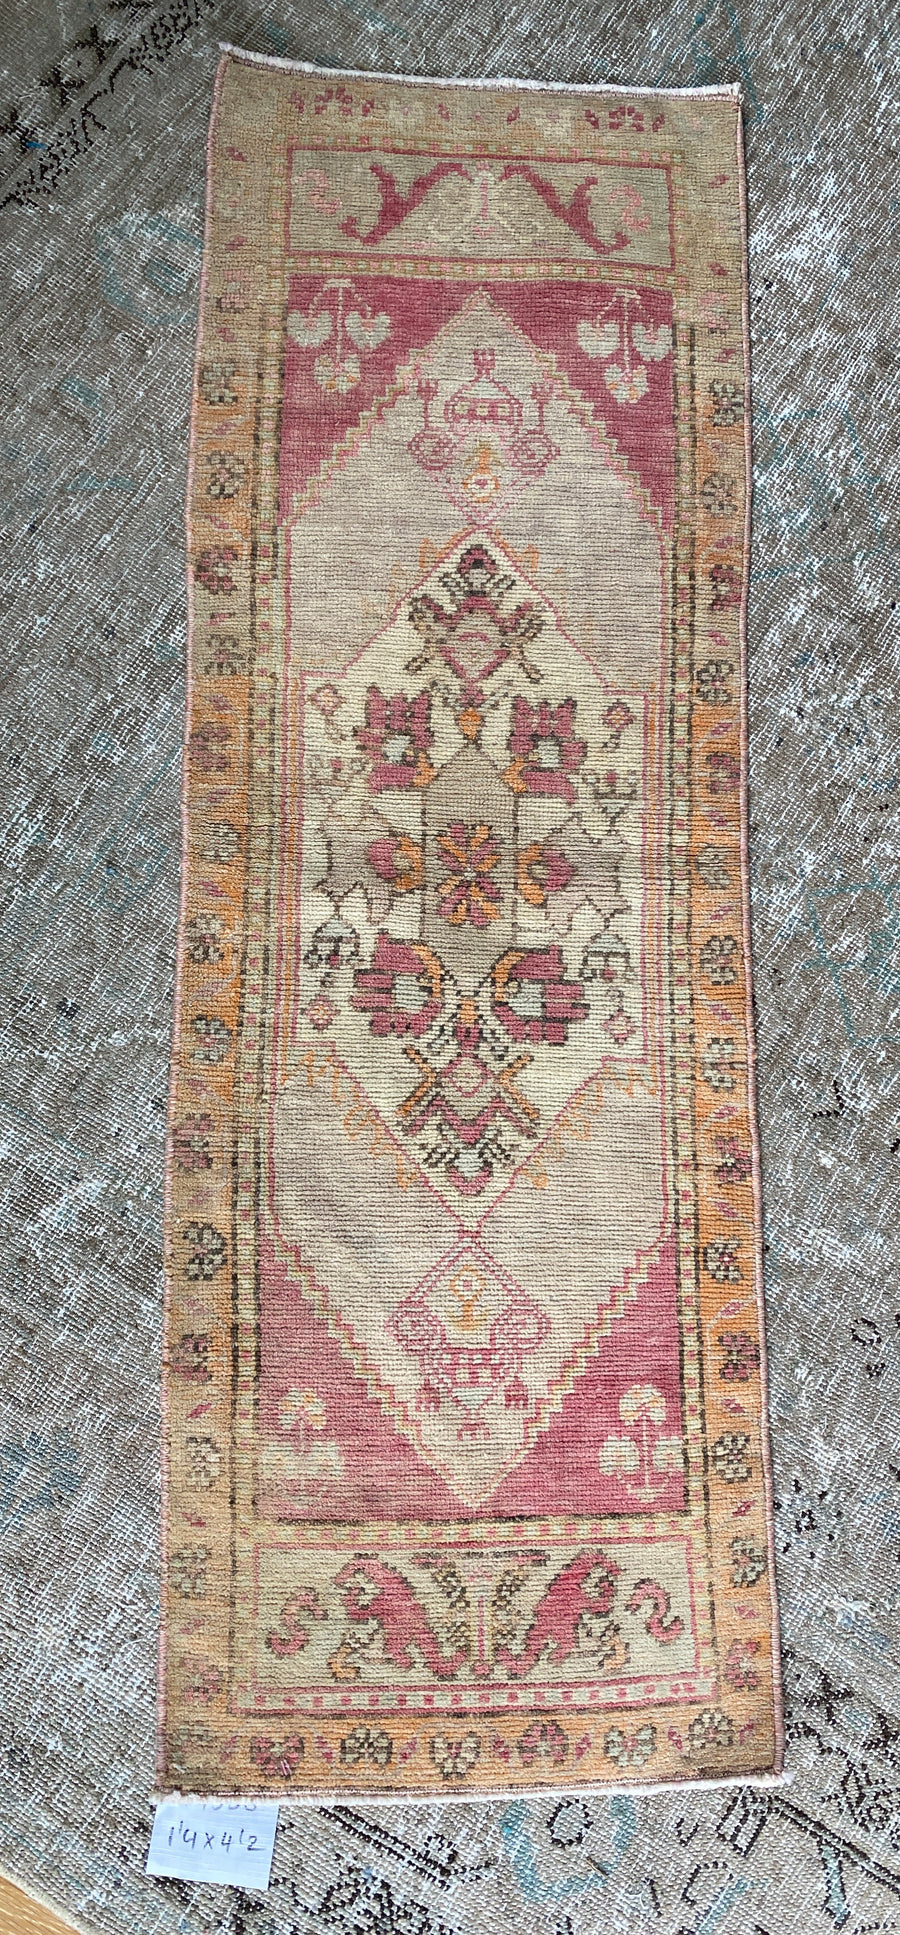 1’4 x 4’2 Vintage Oushak Mat Runner Very Muted Wine, Apricot & Beige SB